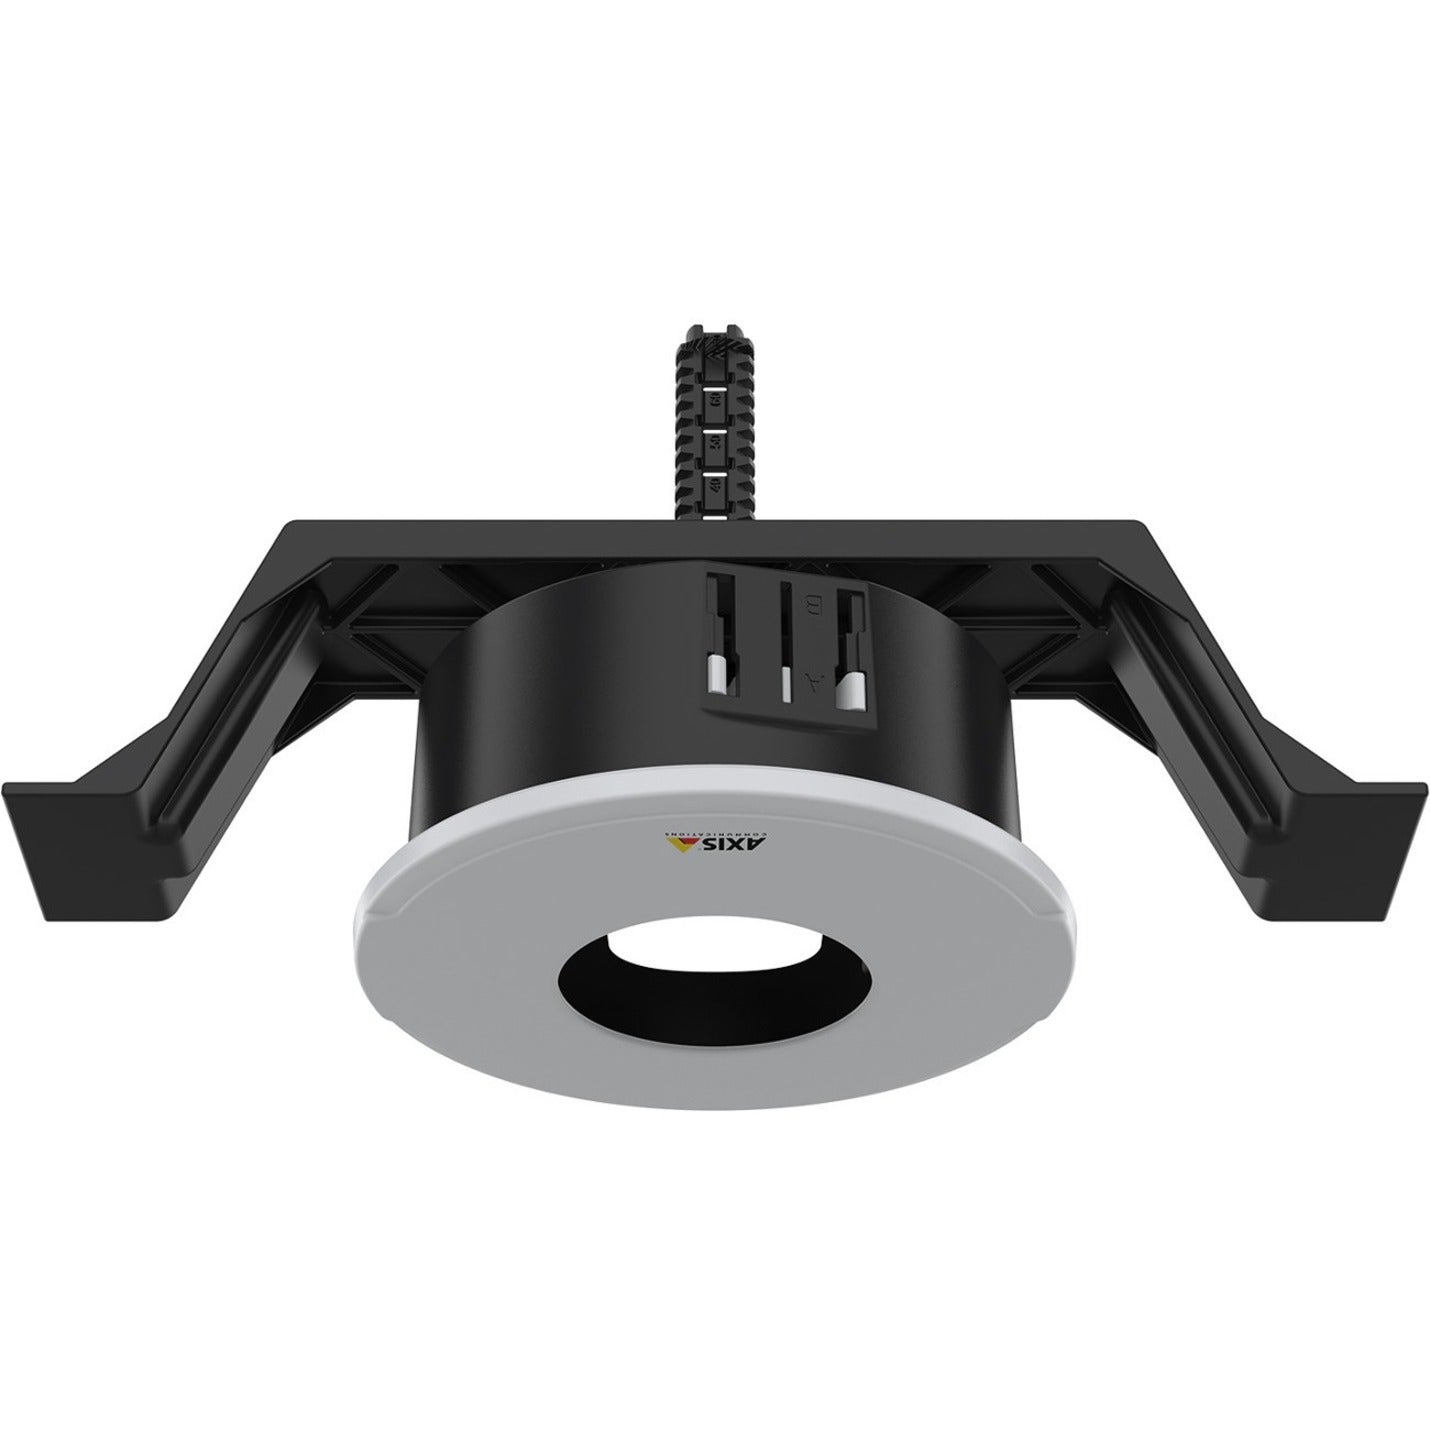 AXIS 01856-001 TM3201 Recessed Mount, Ceiling Mount for Network Camera